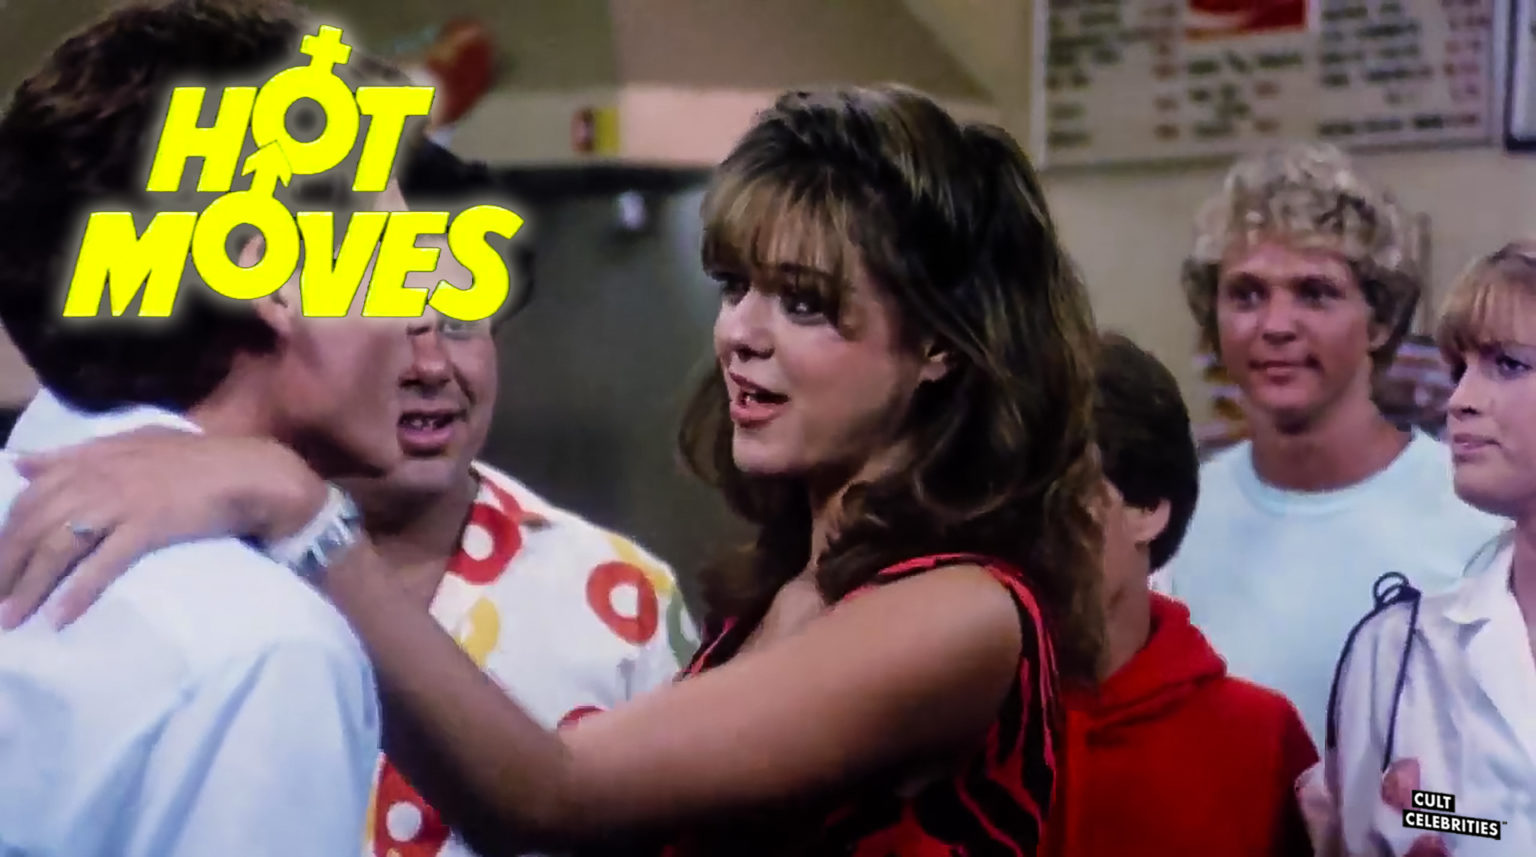 Hot Moves 1984 Cult Celebrities